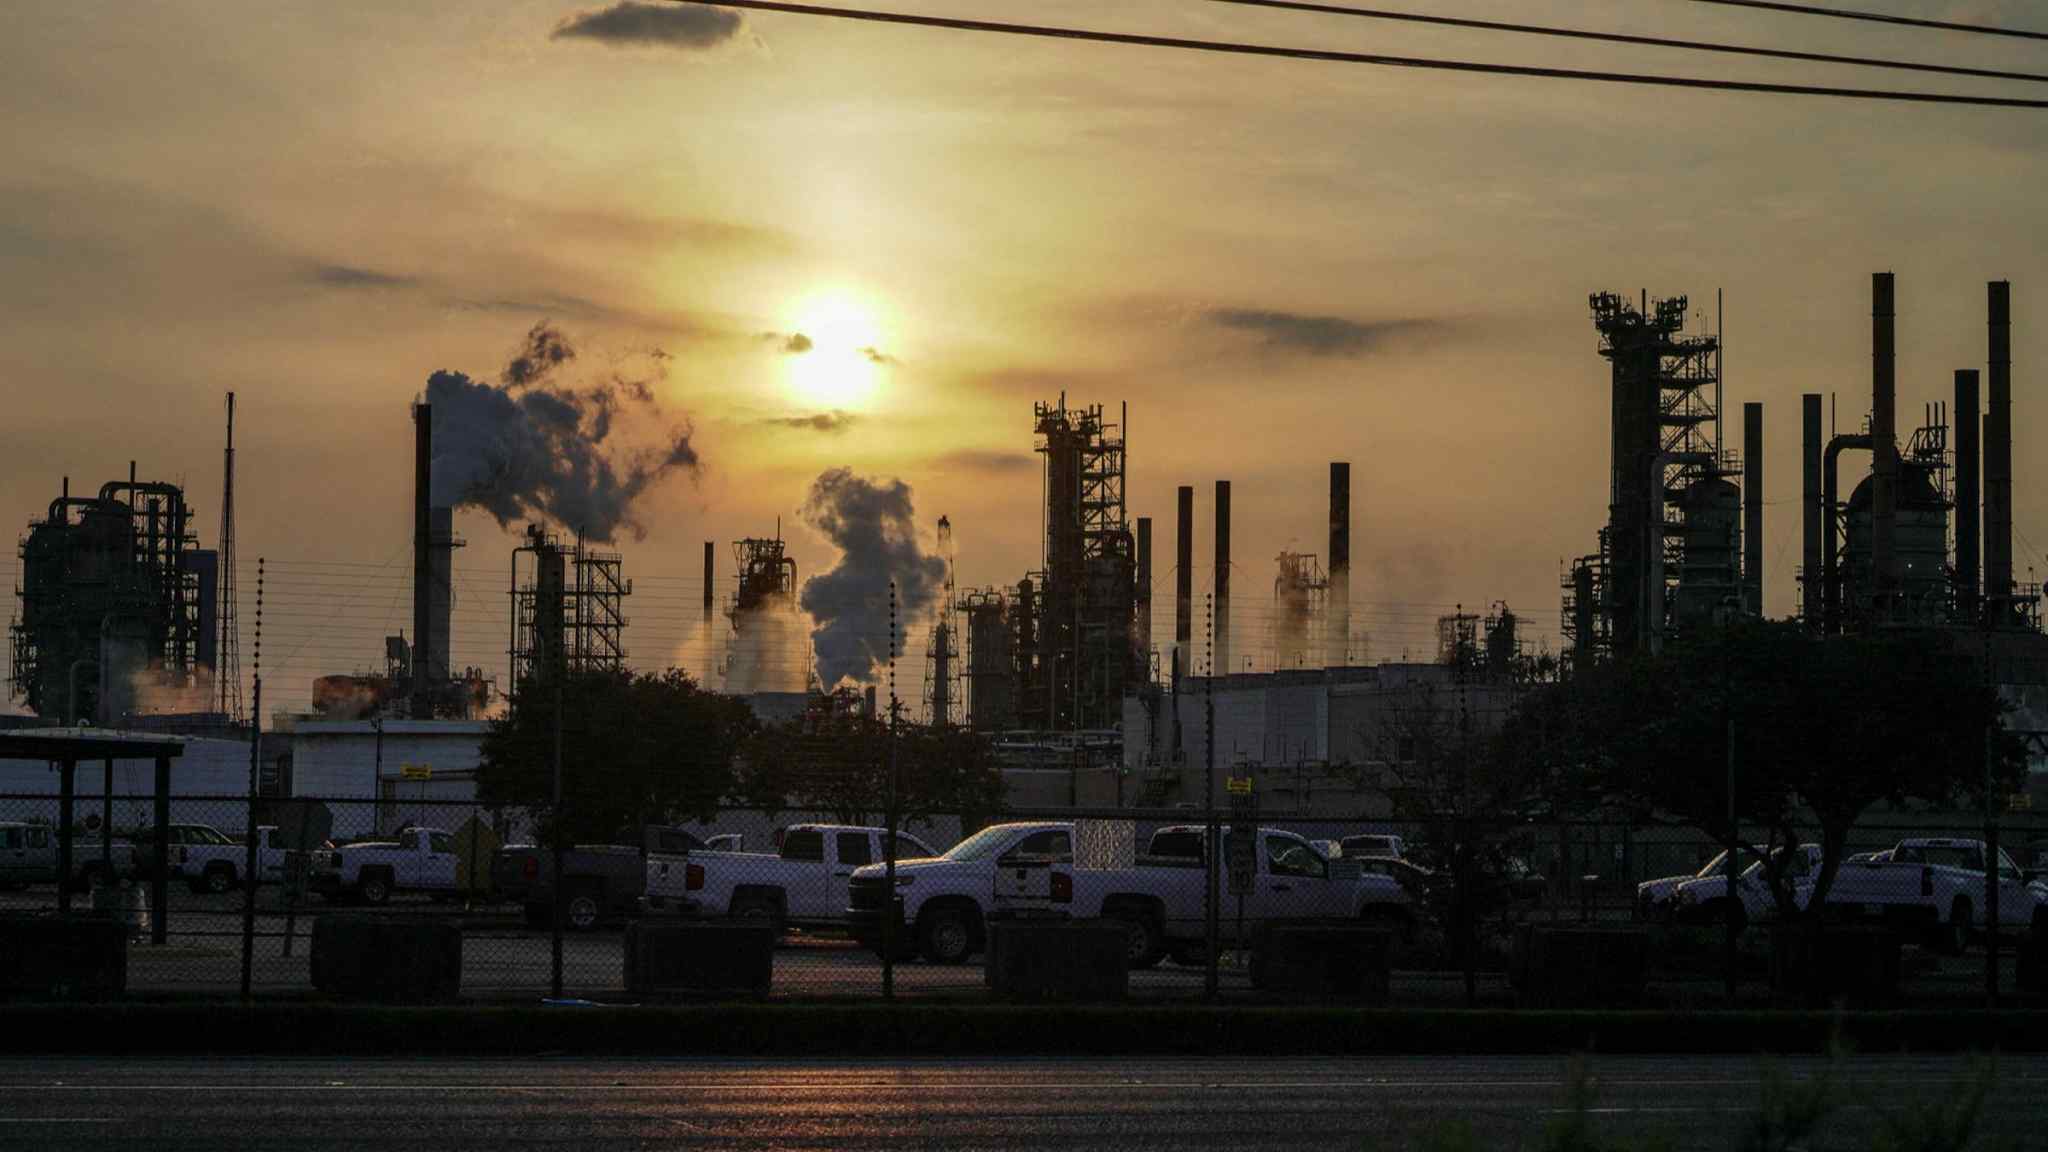 ExxonMobil aims to cut oil and gas emissions to net zero by 2050